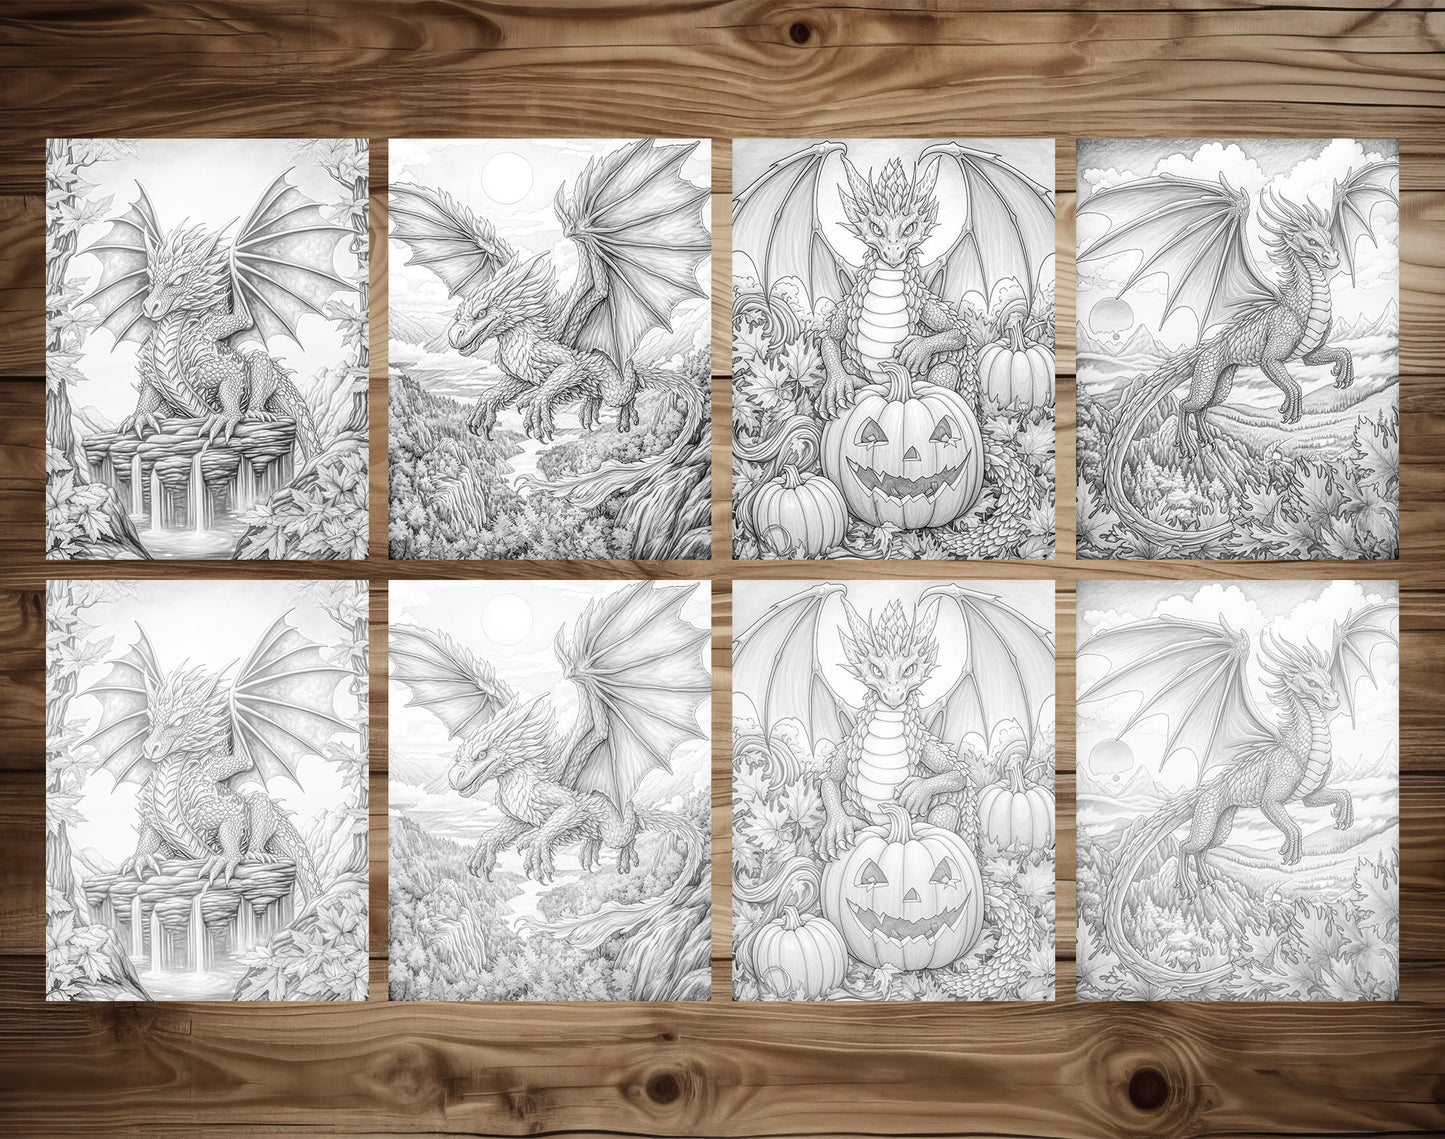 50 Autumn Dragons Grayscale Coloring Pages - Instant Download - Printable PDF Dark/Light